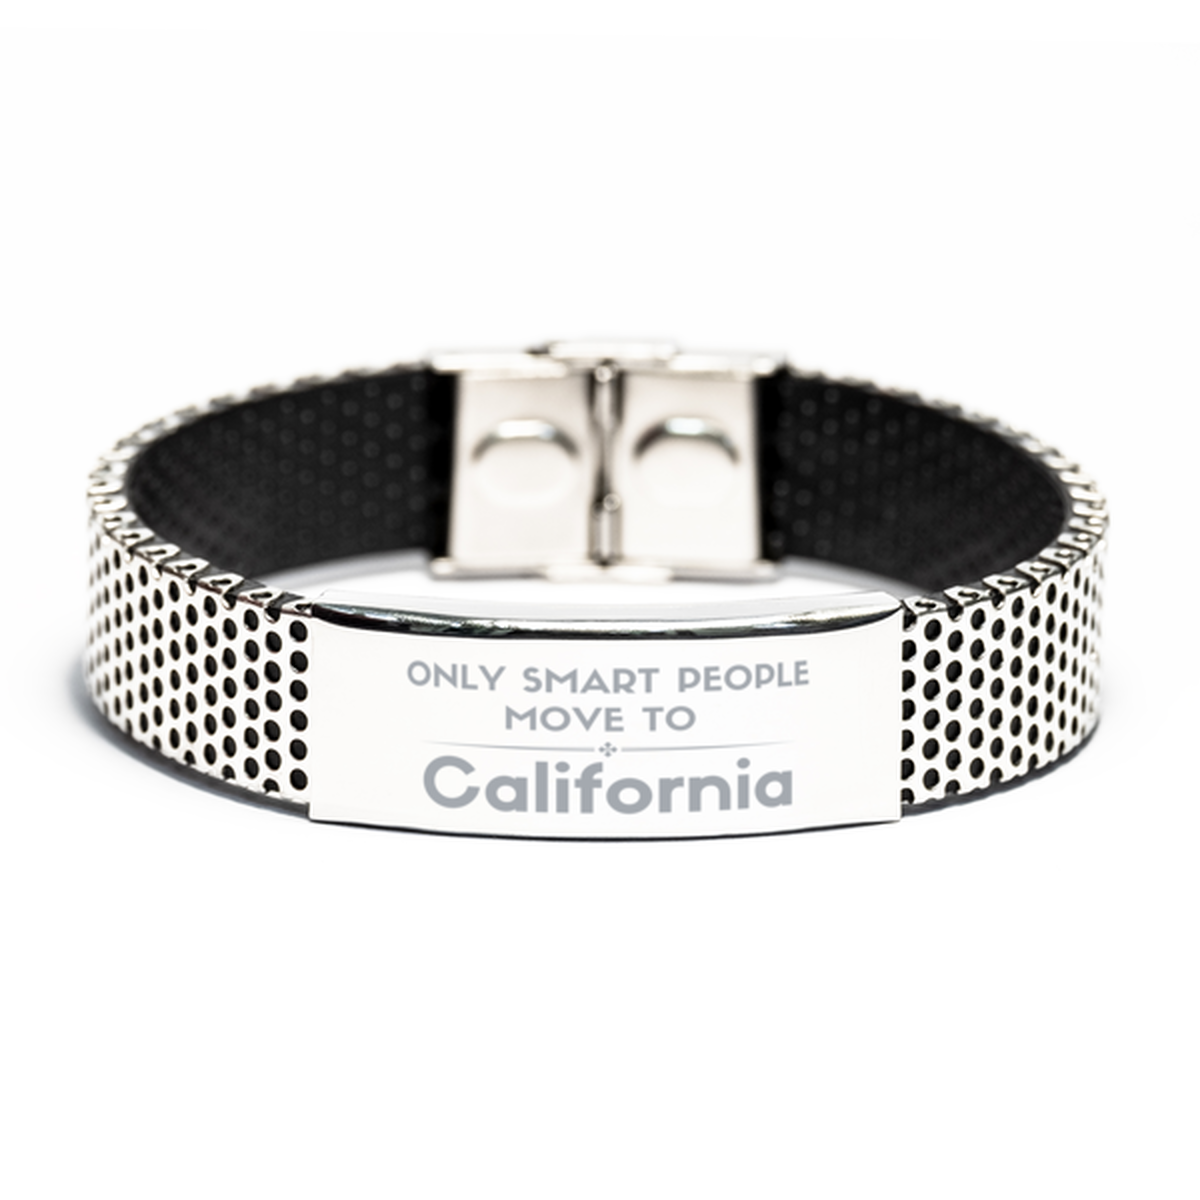 Only smart people move to California Stainless Steel Bracelet, Gag Gifts For California, Move to California Gifts for Friends Coworker Funny Saying Quote